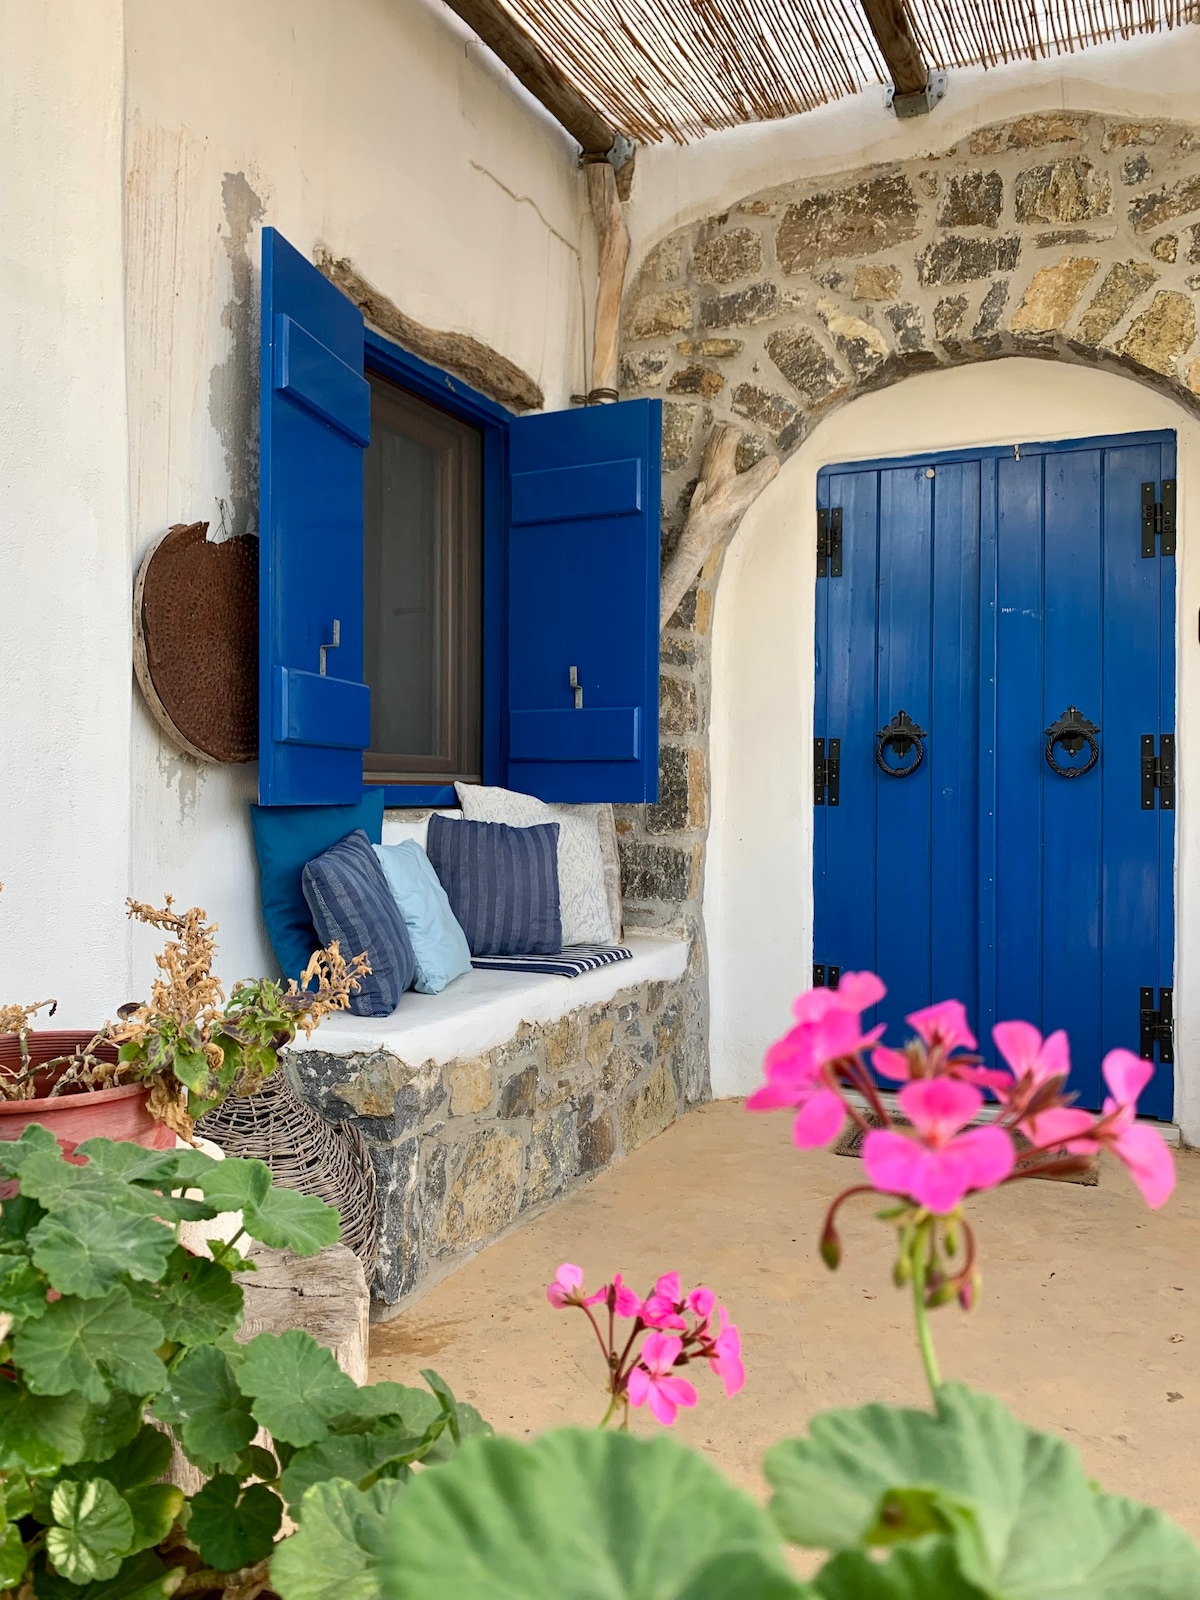 Comfortable coziness in authentic Greek village